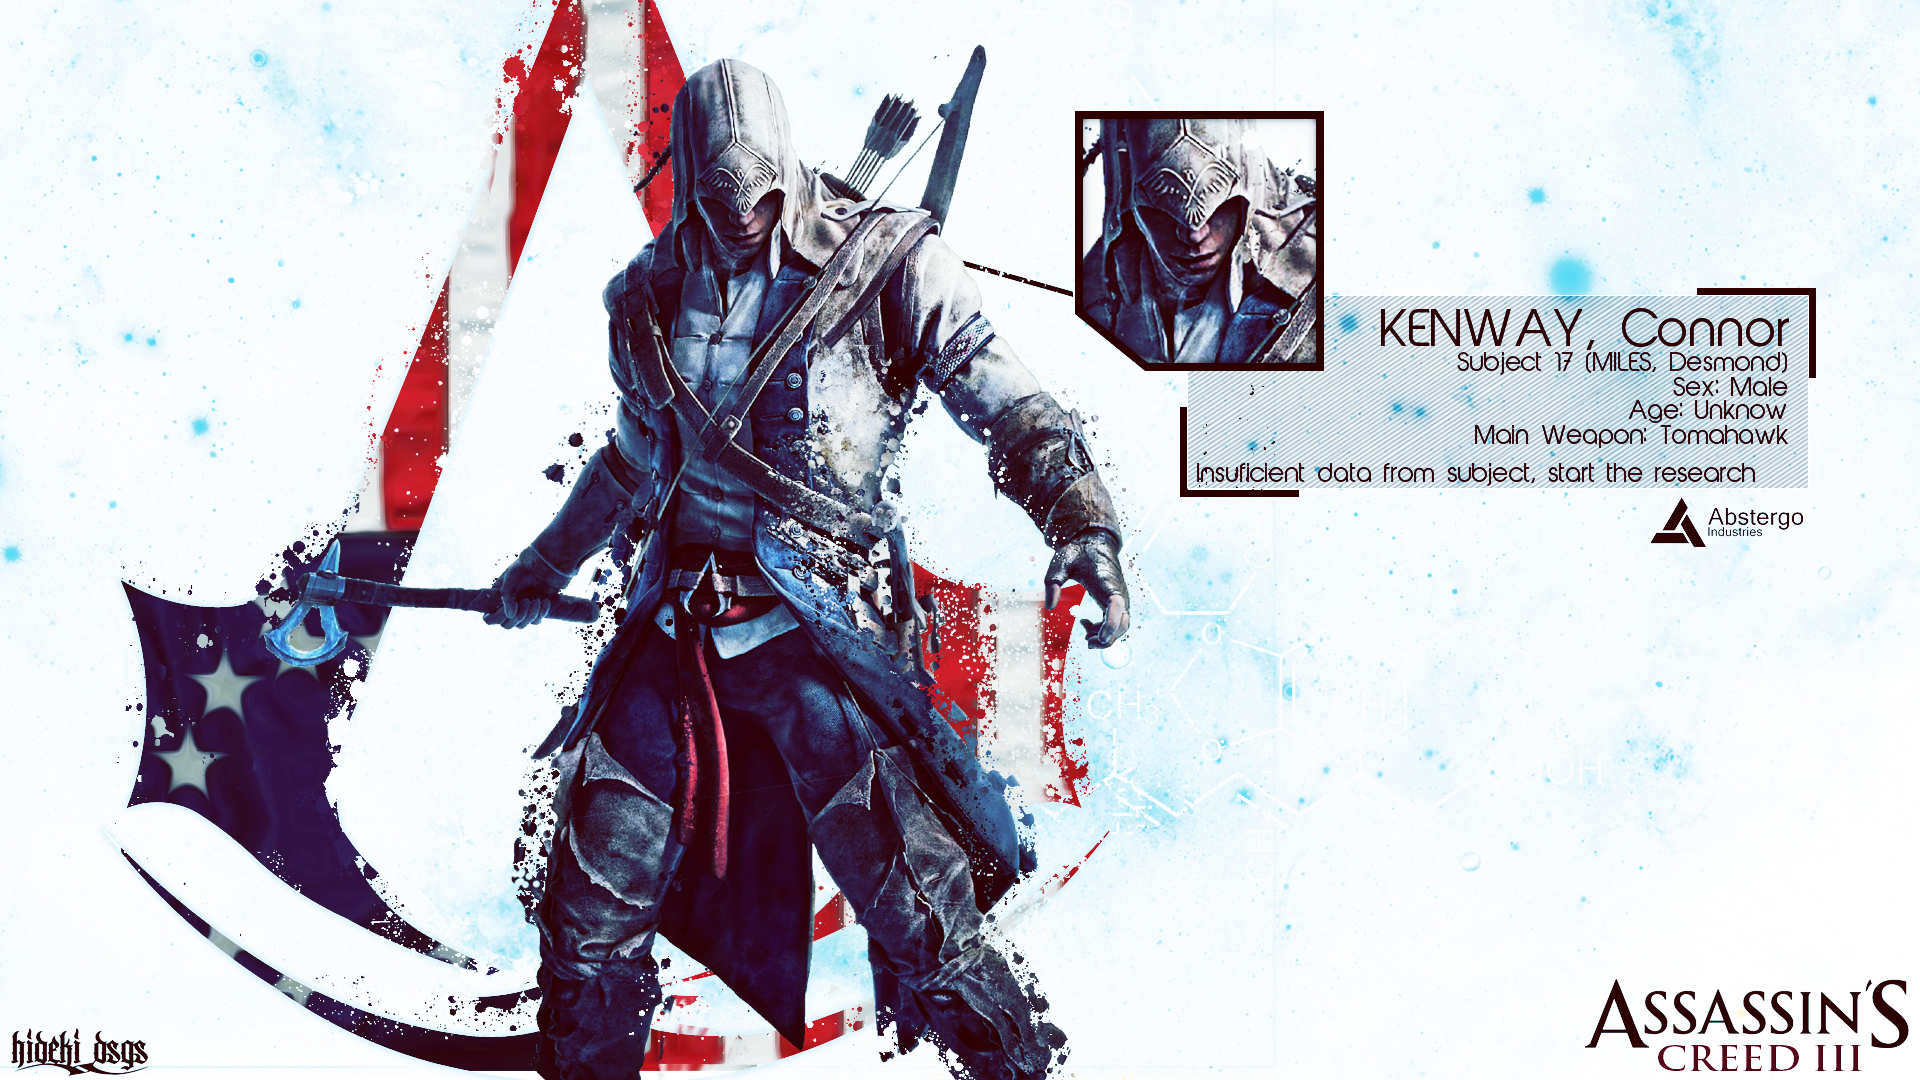 180+ Assassin's Creed III HD Wallpapers and Backgrounds